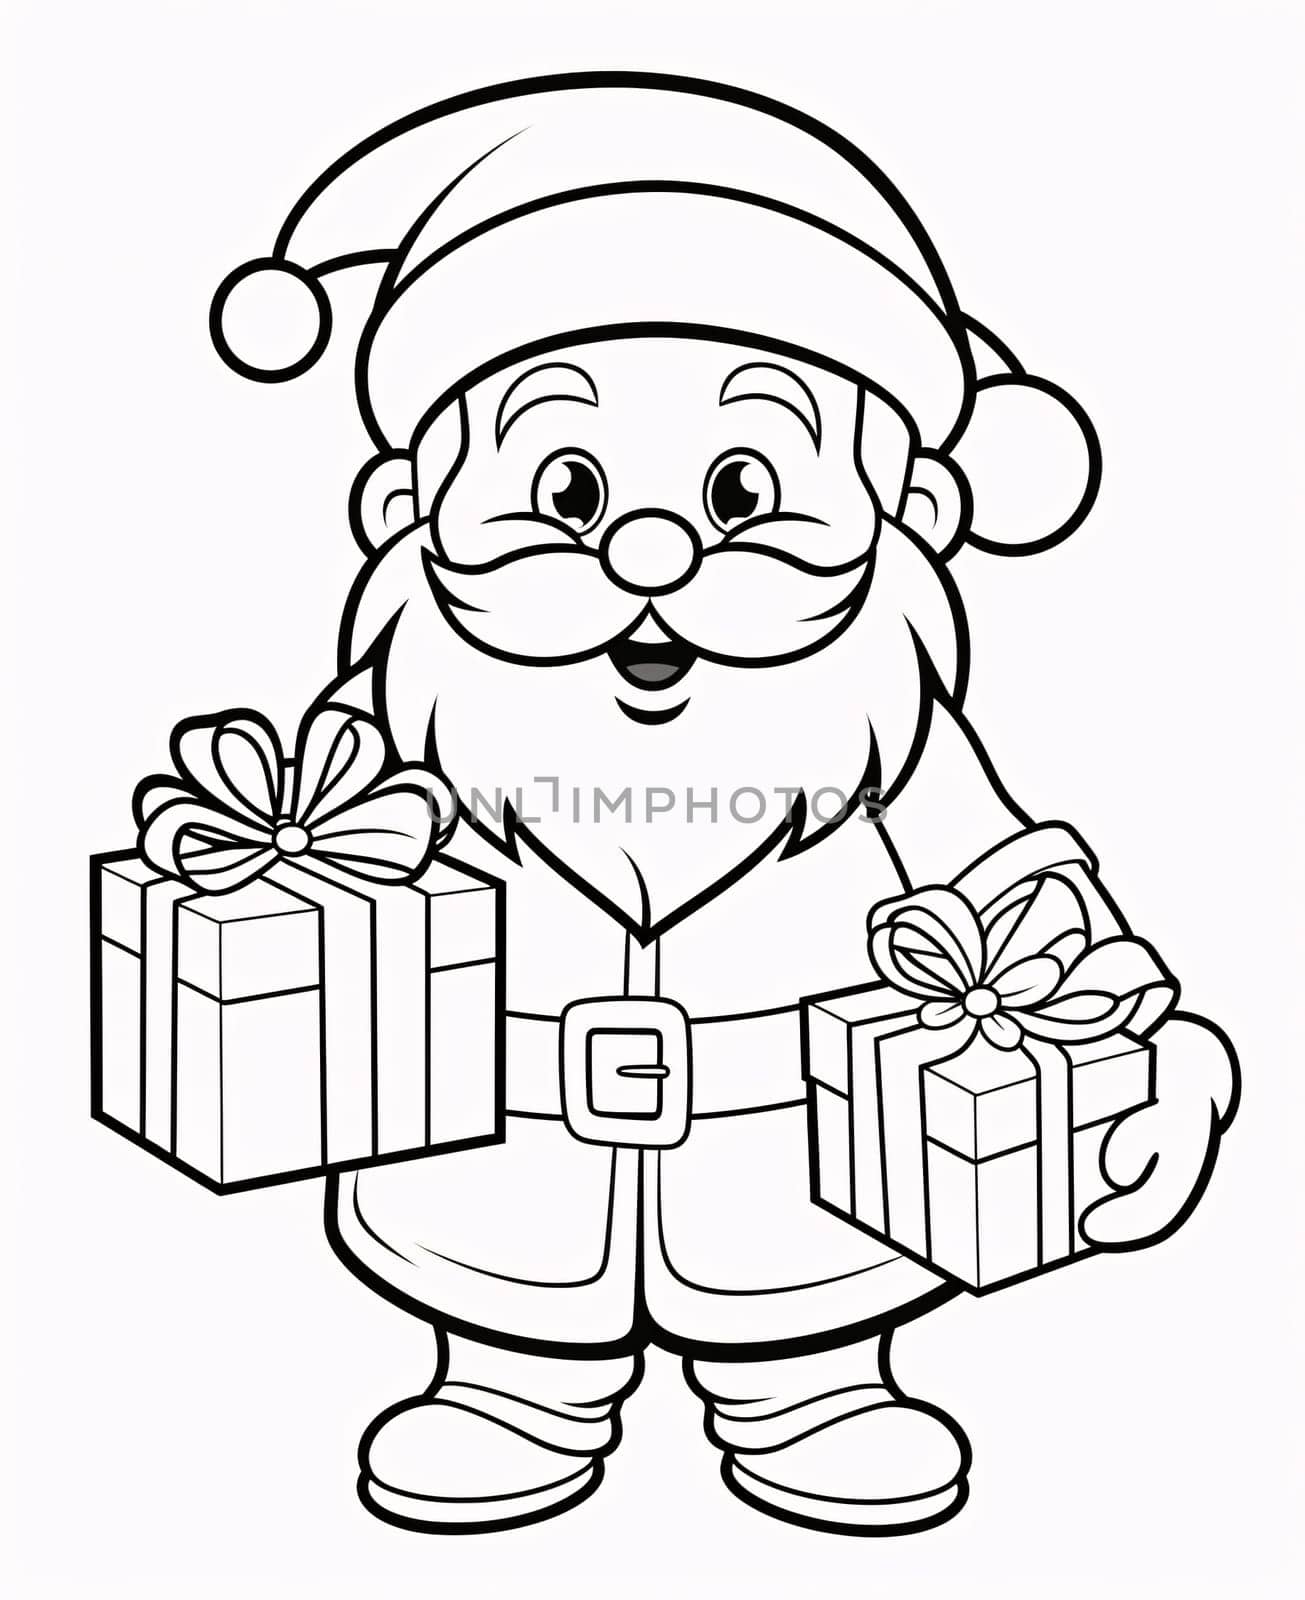 Black and white coloring sheet: Santa Claus with presents. Gifts as a day symbol of present and love. A time of falling in love and love.